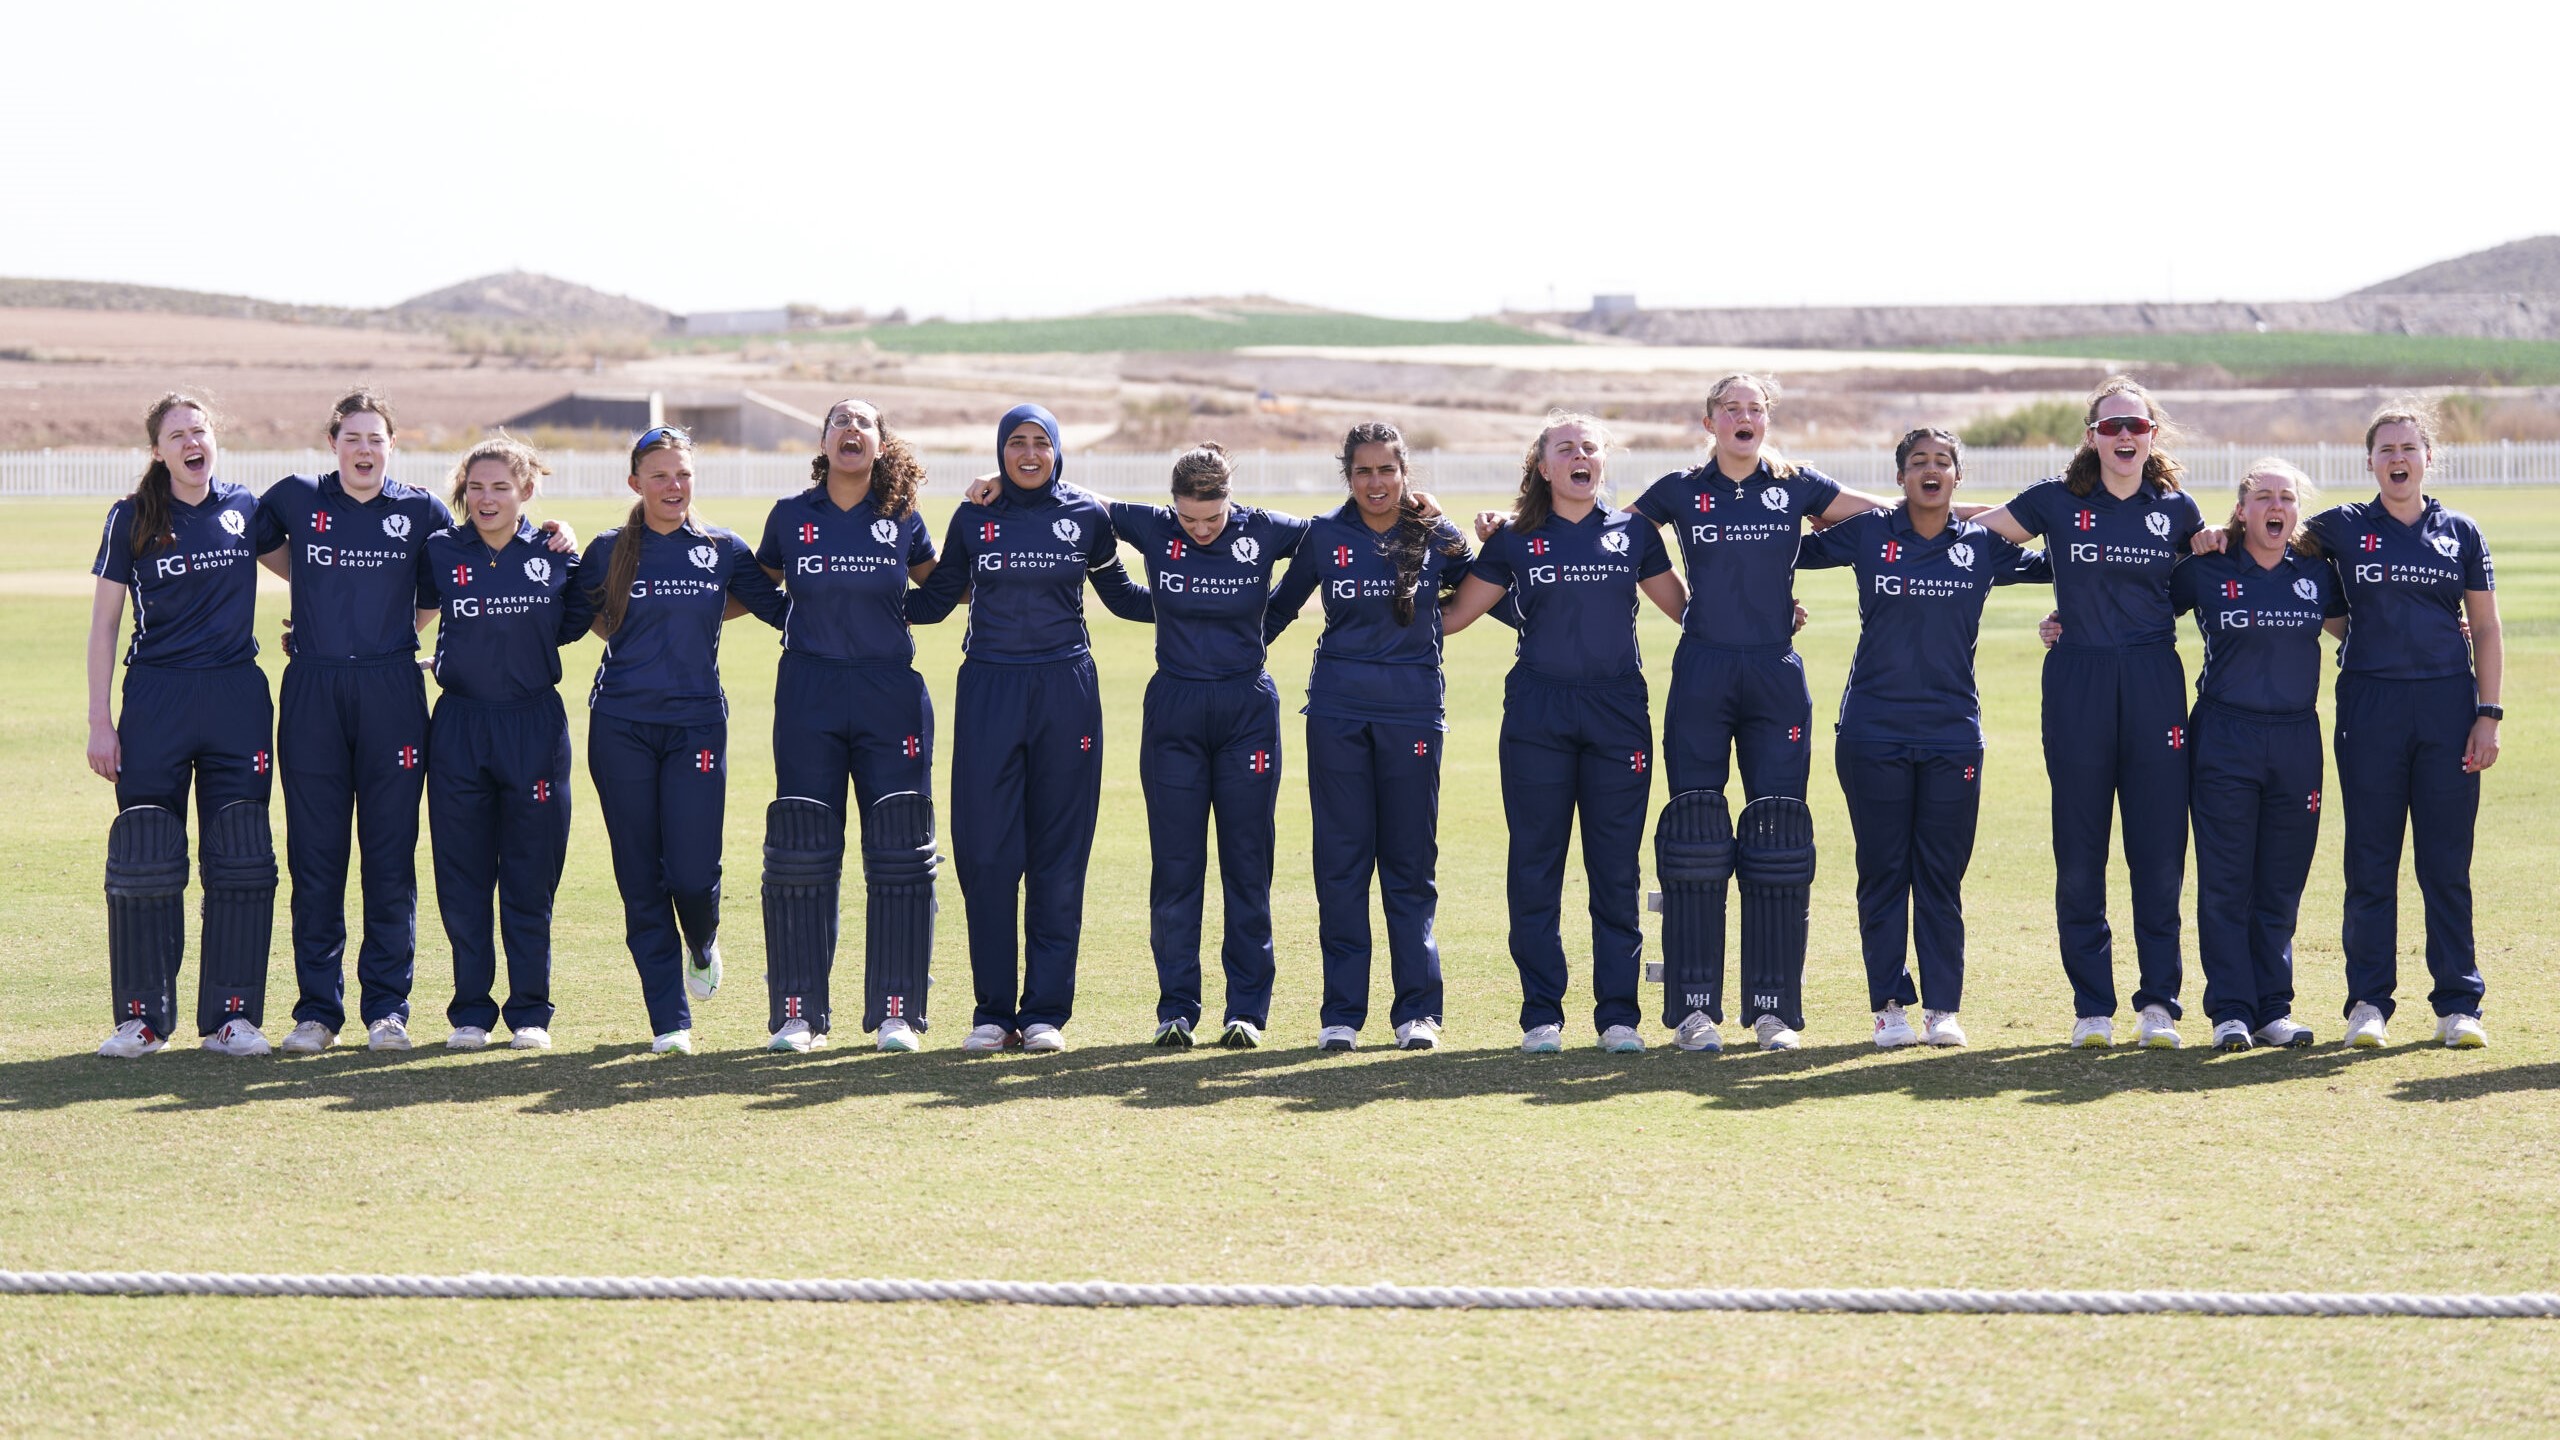 SCOTLAND SQUAD NAMED FOR ICC WOMEN’S T20 WORLD CUP QUALIFIER